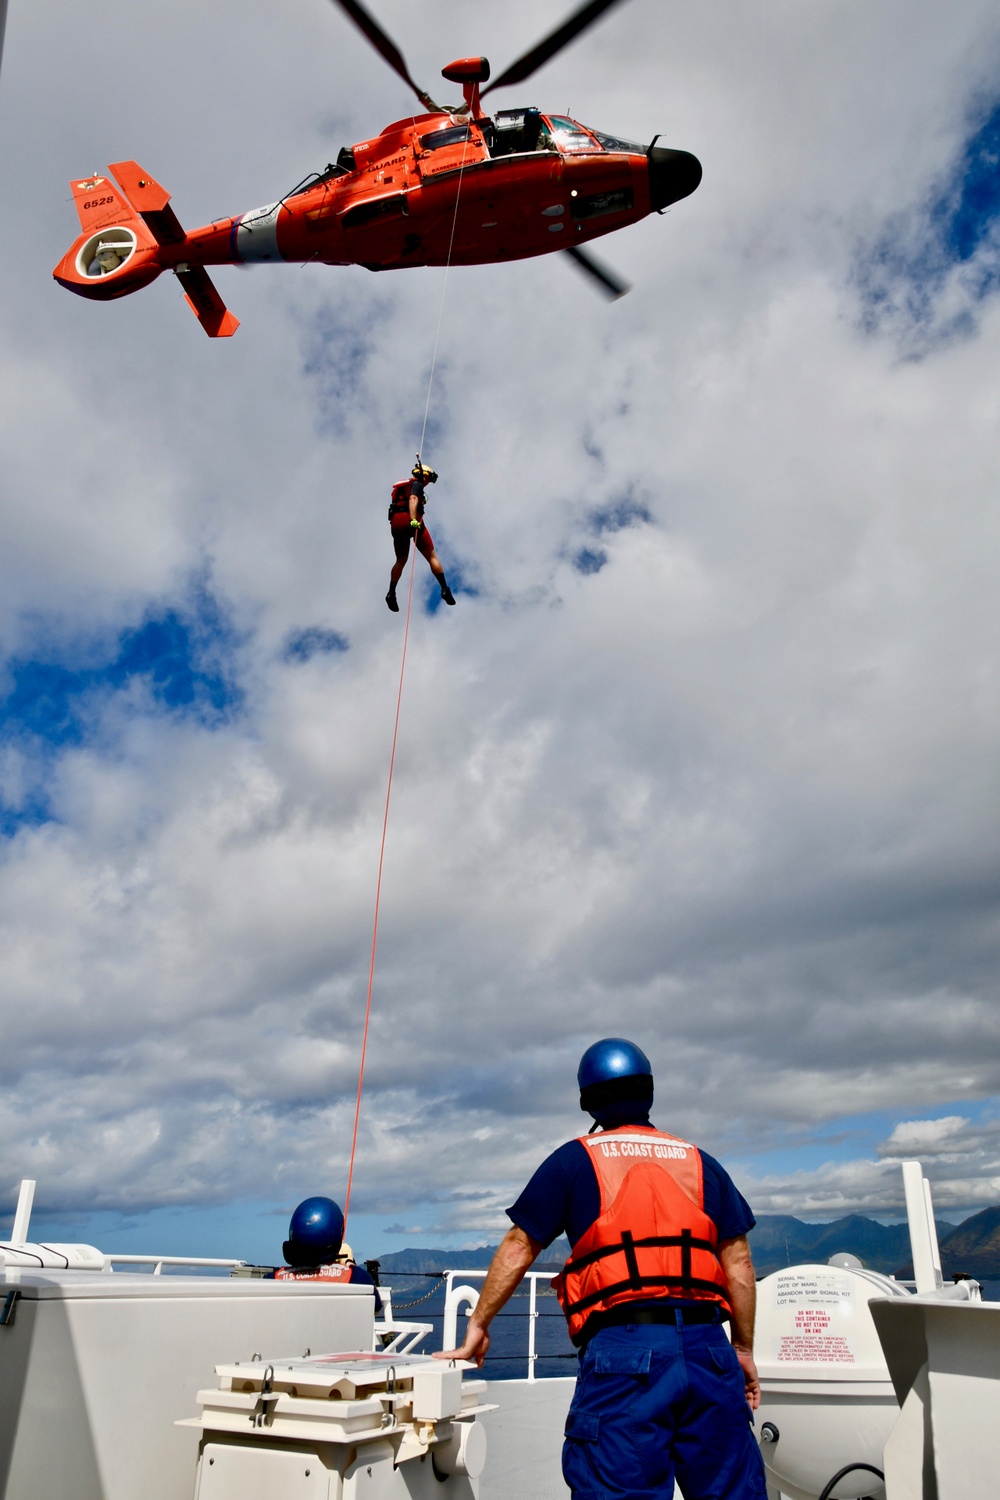 Responders conduct search and rescue exercise off Oahu